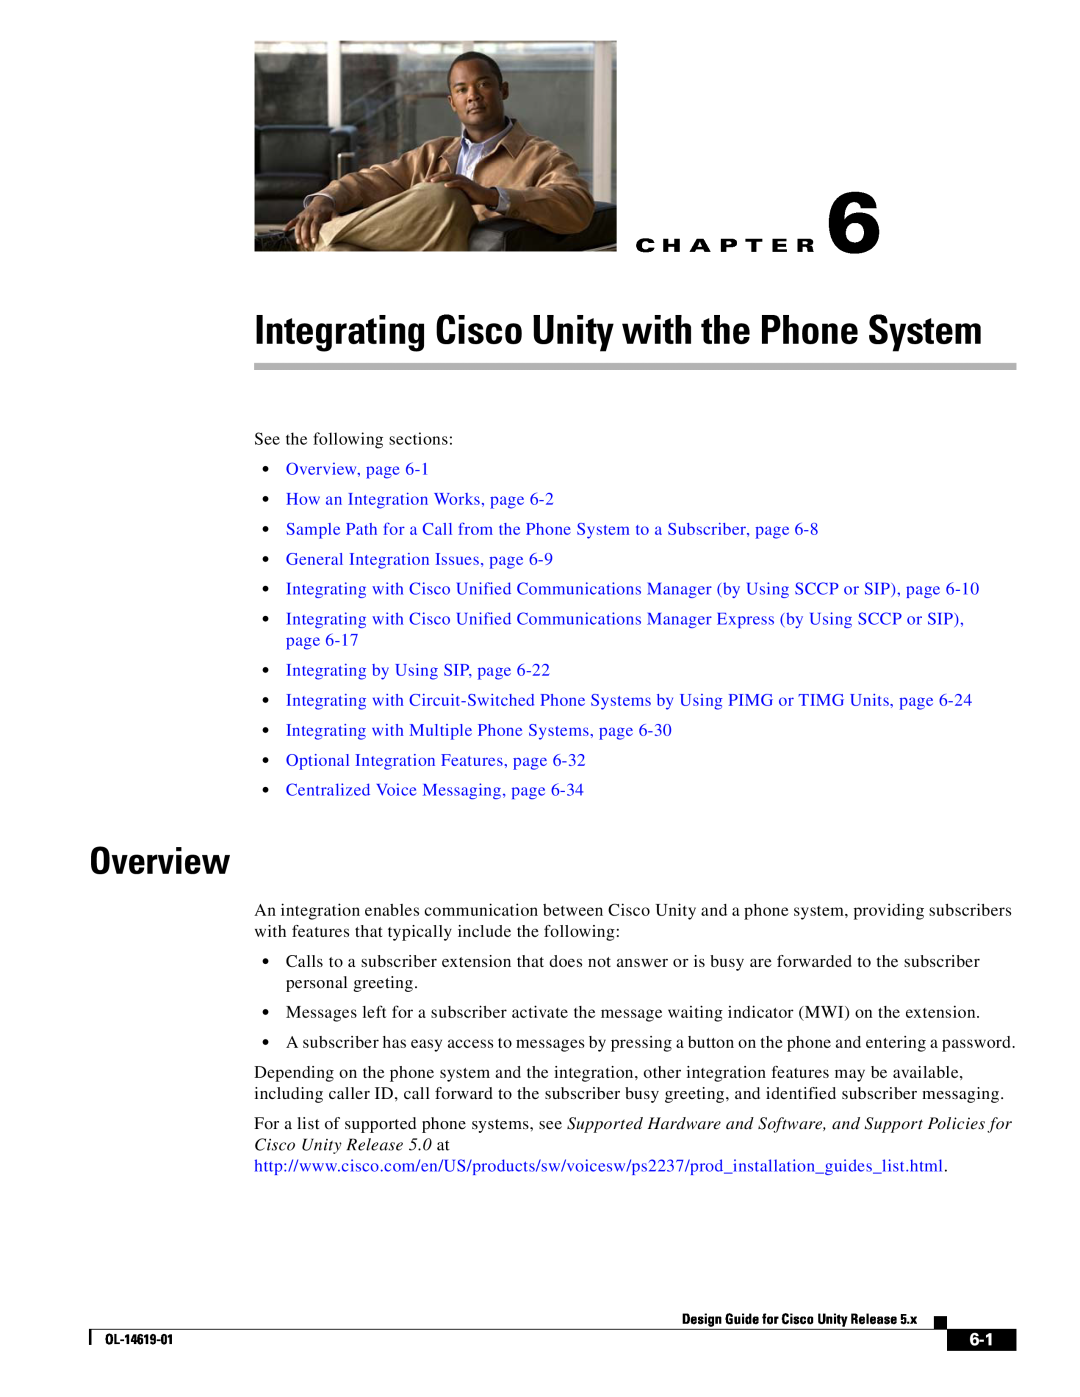 Cisco Systems OL-14619-01 manual Integrating Cisco Unity with the Phone System, Overview, General Integration Issues, page 